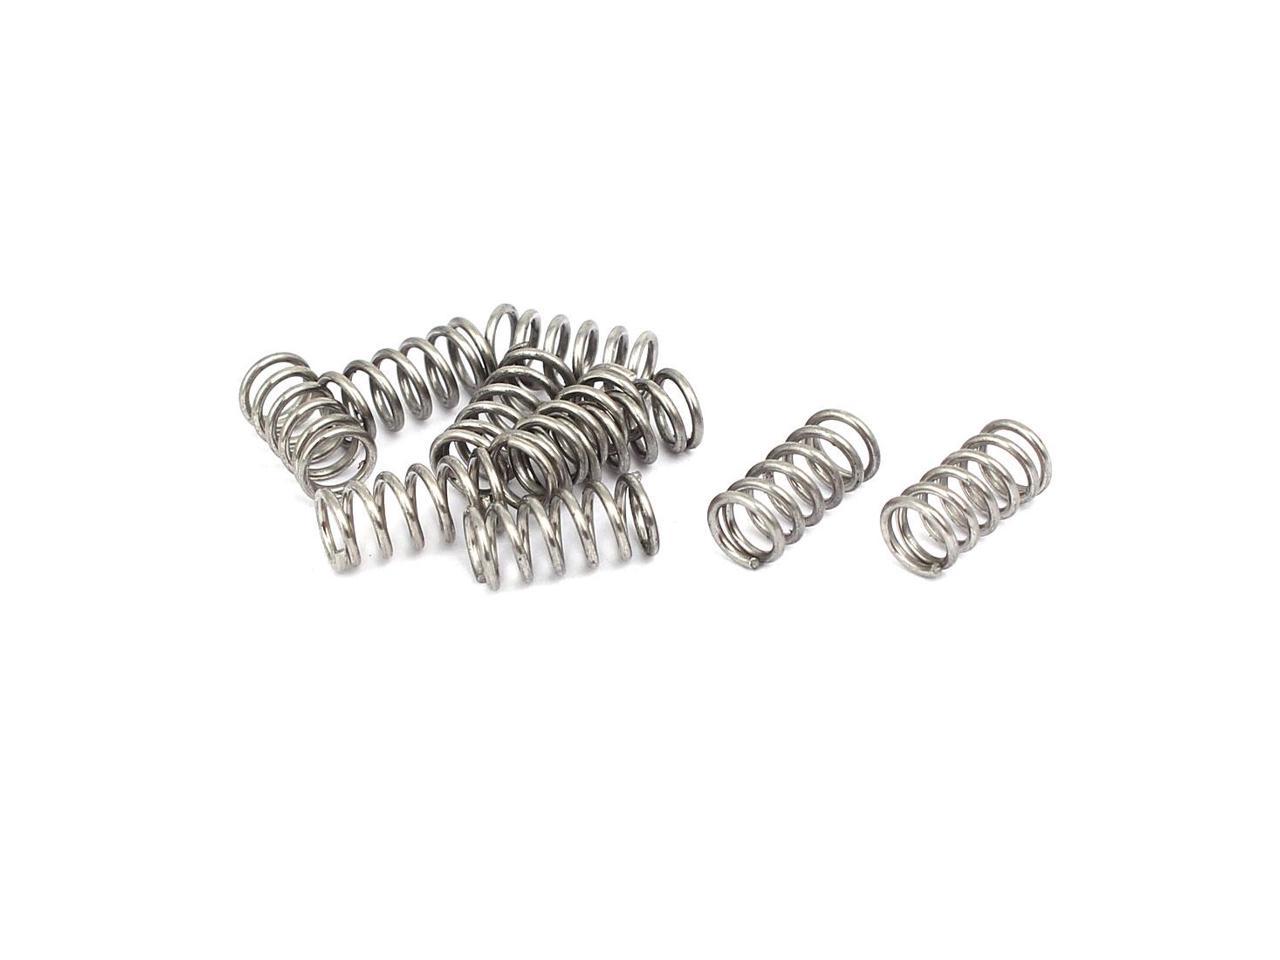 0.8mmx13mmx45mm 304 Stainless Steel Compression Springs Silver Tone 10pcs 